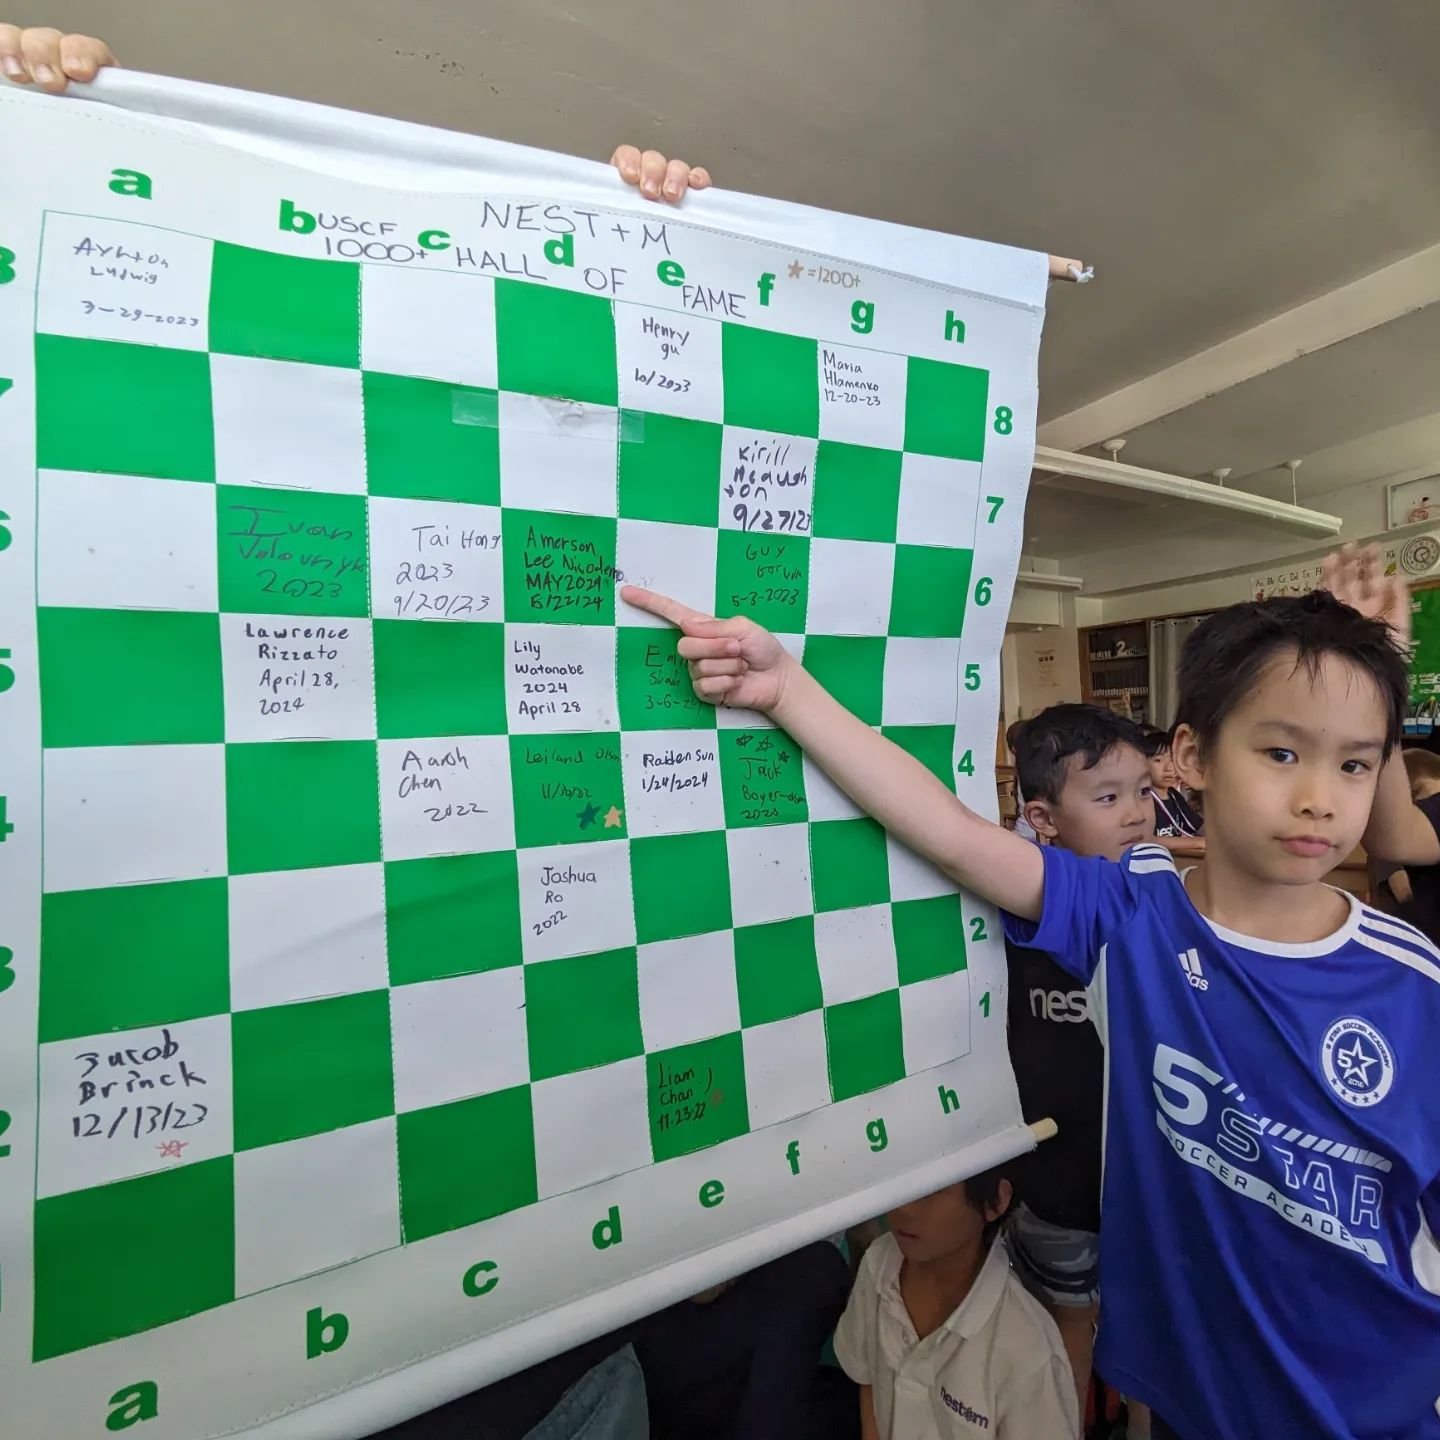 Amerson, congratulations! Join us in celebrating his achievement 🥳 His 3 wins, perfect score at the Spring's Manhattan Cup Team Tournament puts him at a current peak USCF rating of 1018! This first grader has a bright future ahead of him 💪 @nestmso